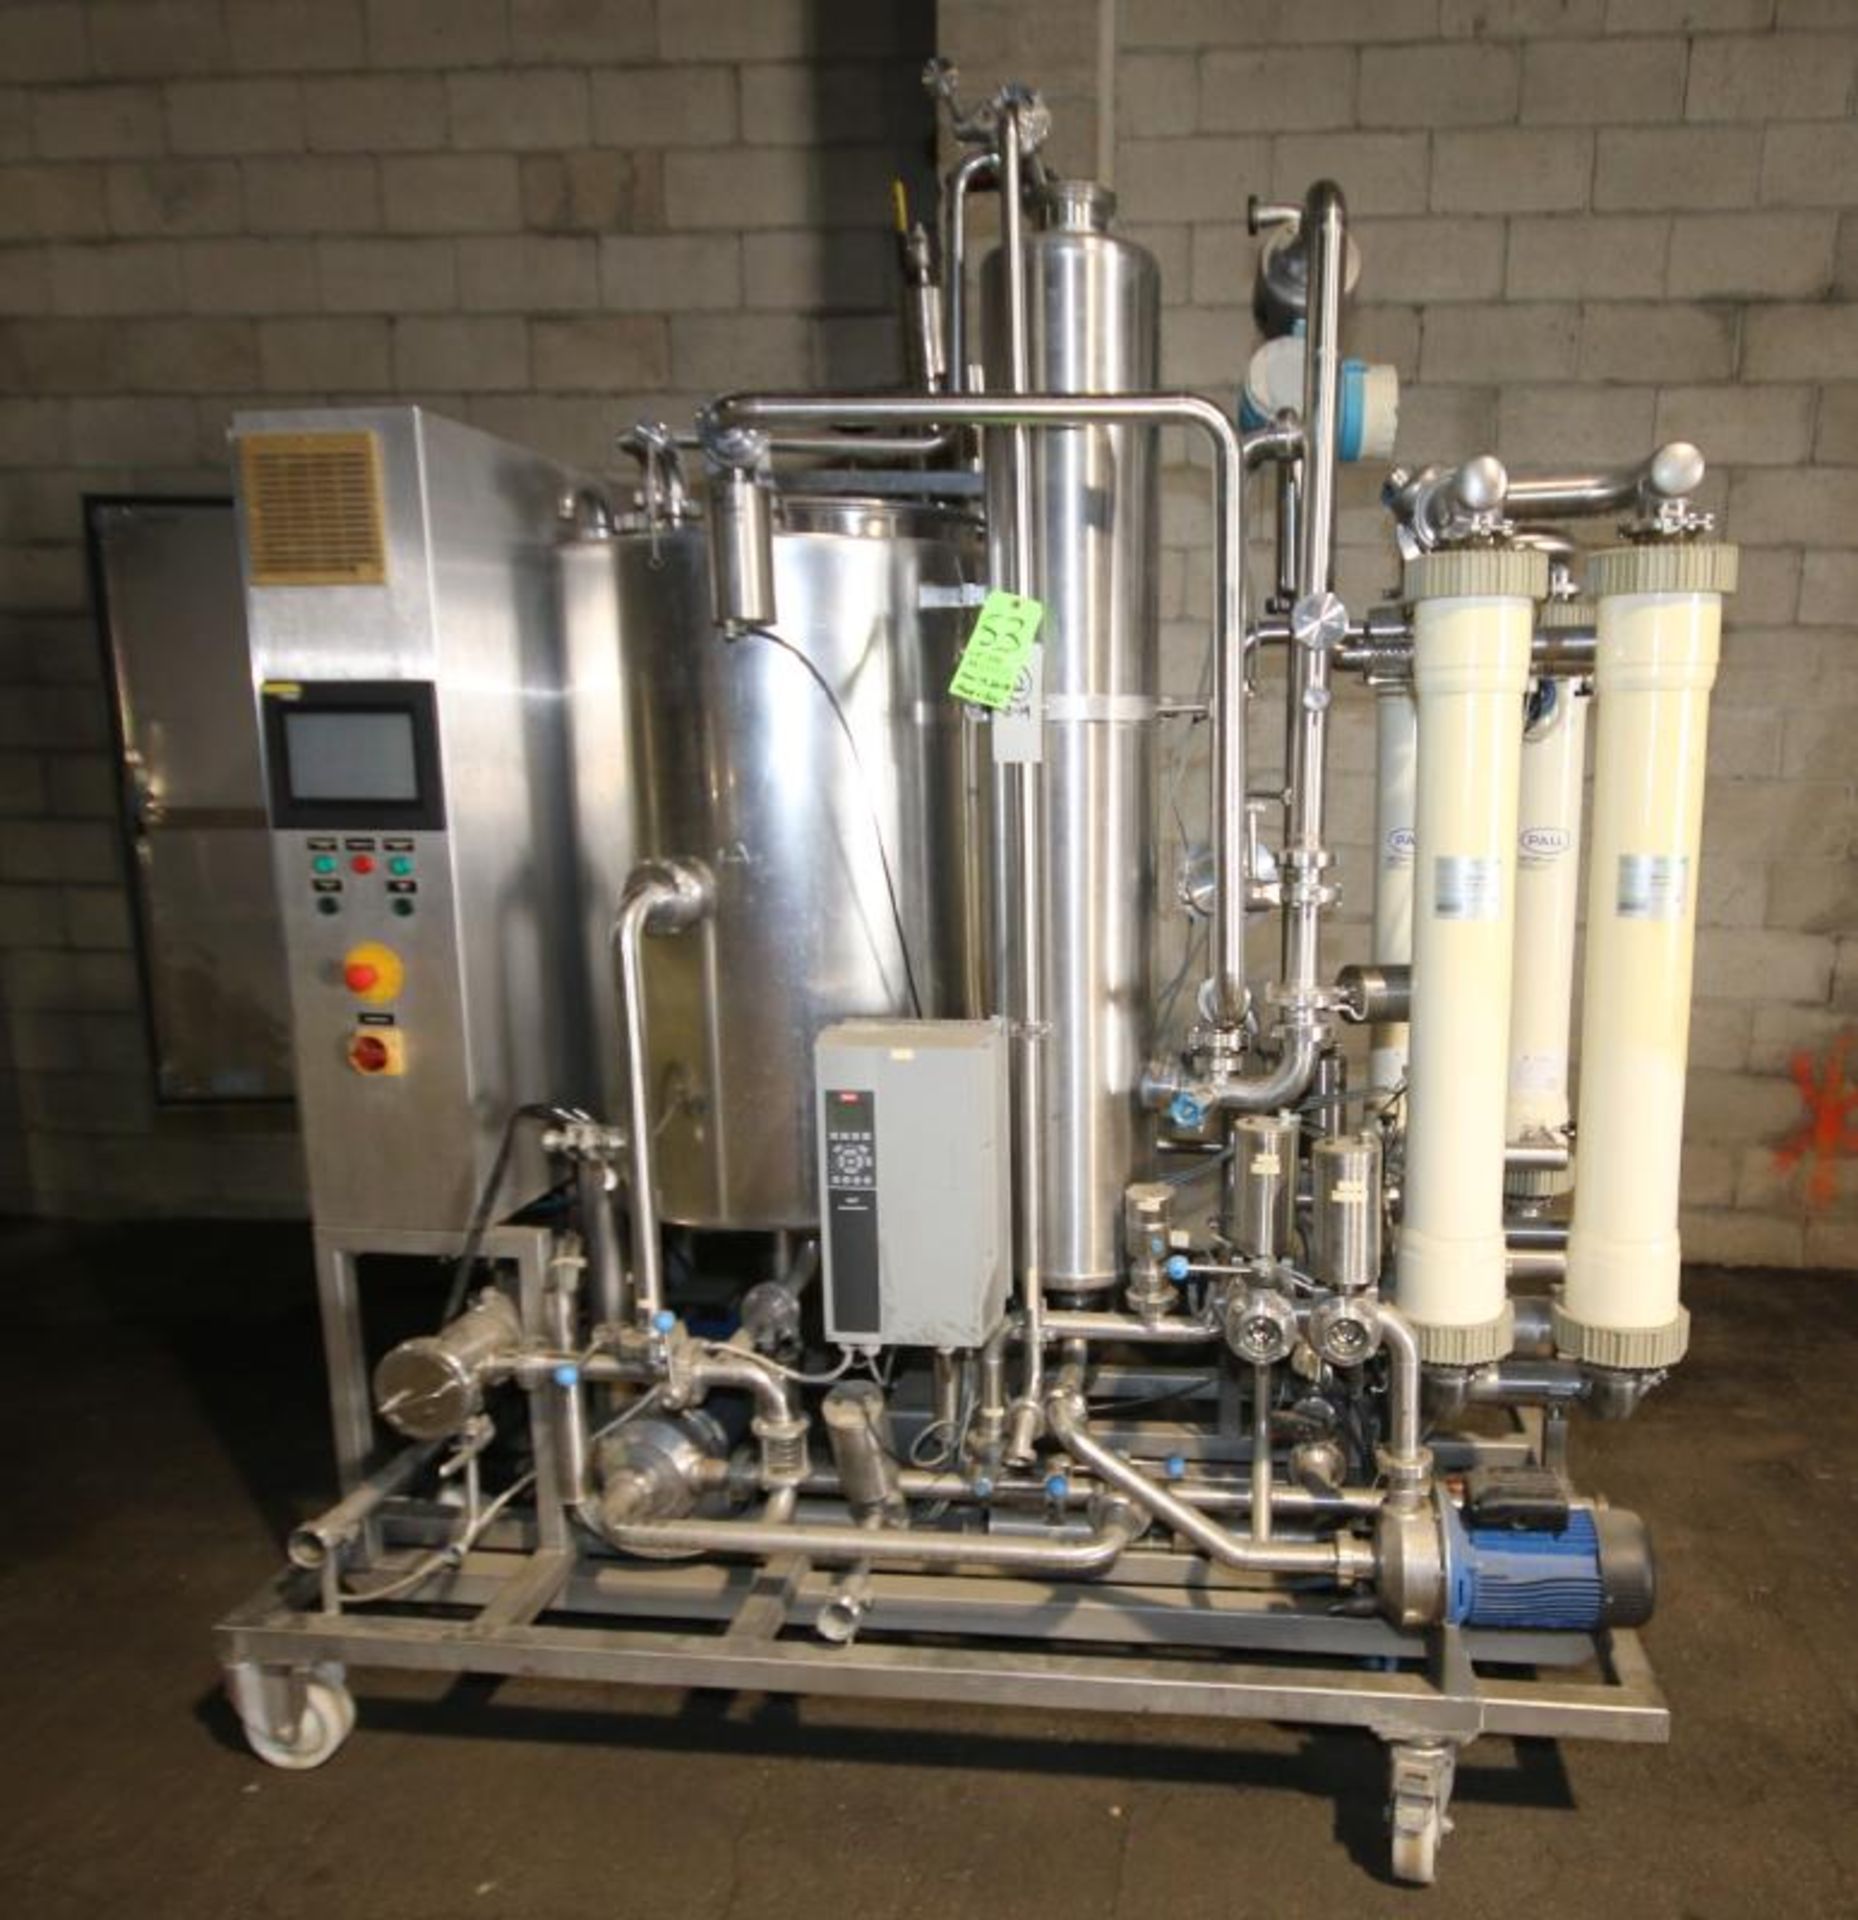 Skid-Mounted S/S CIP System with Aprox. 40" H x 28" W S/S Tank, (3) Centrifugal Pumps, Pall